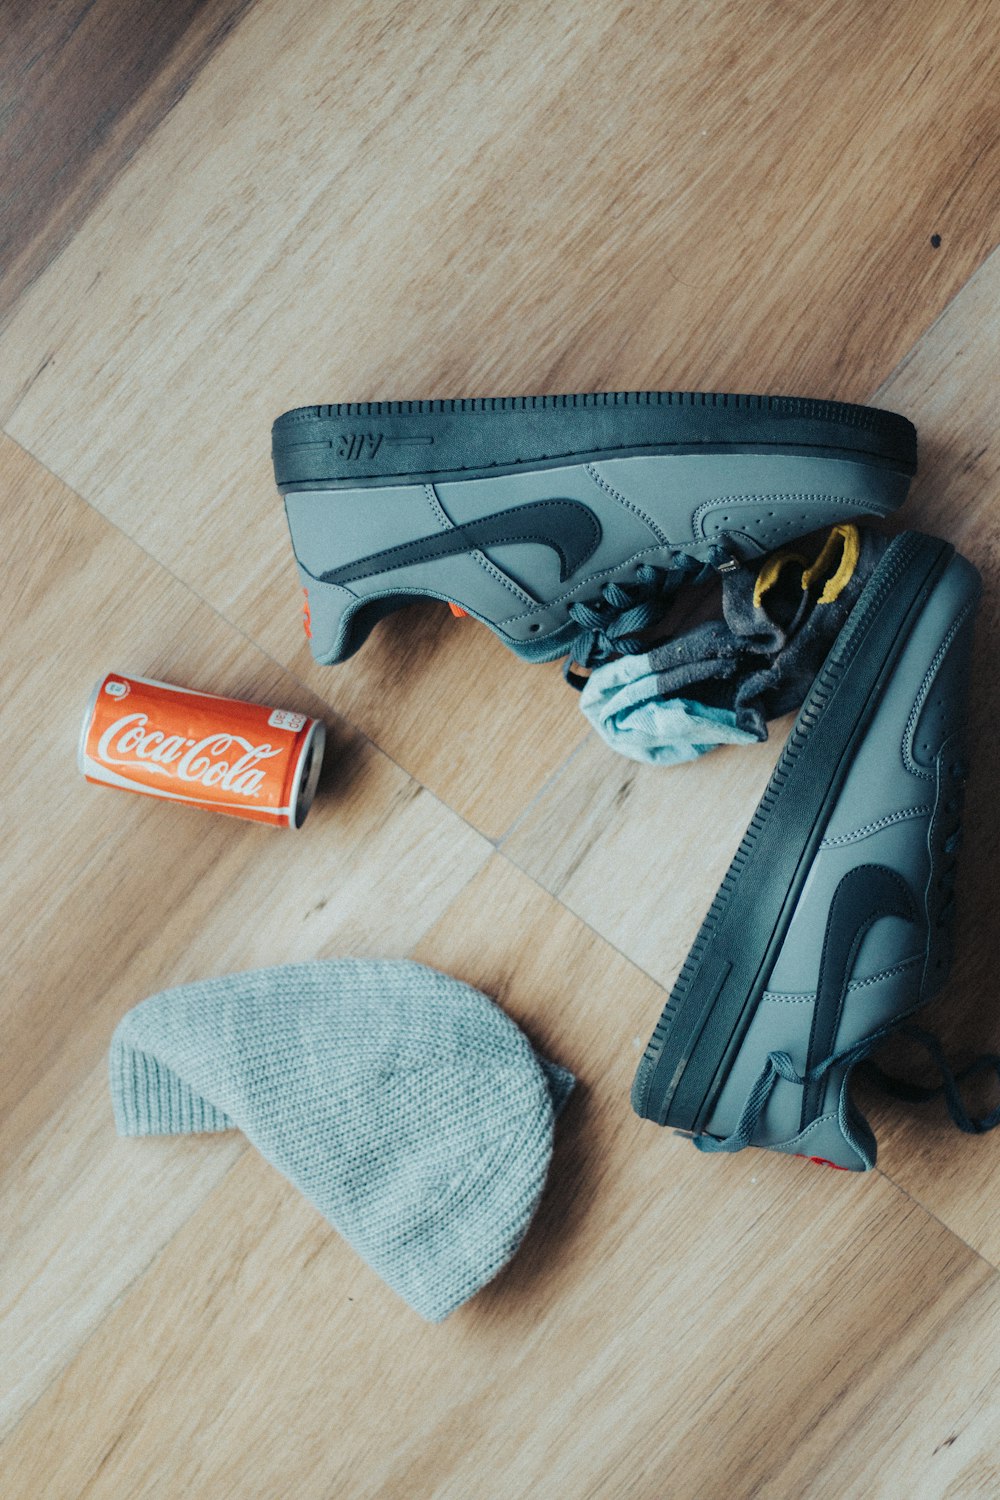 a pair of sneakers, a can of soda, and a pair of socks are